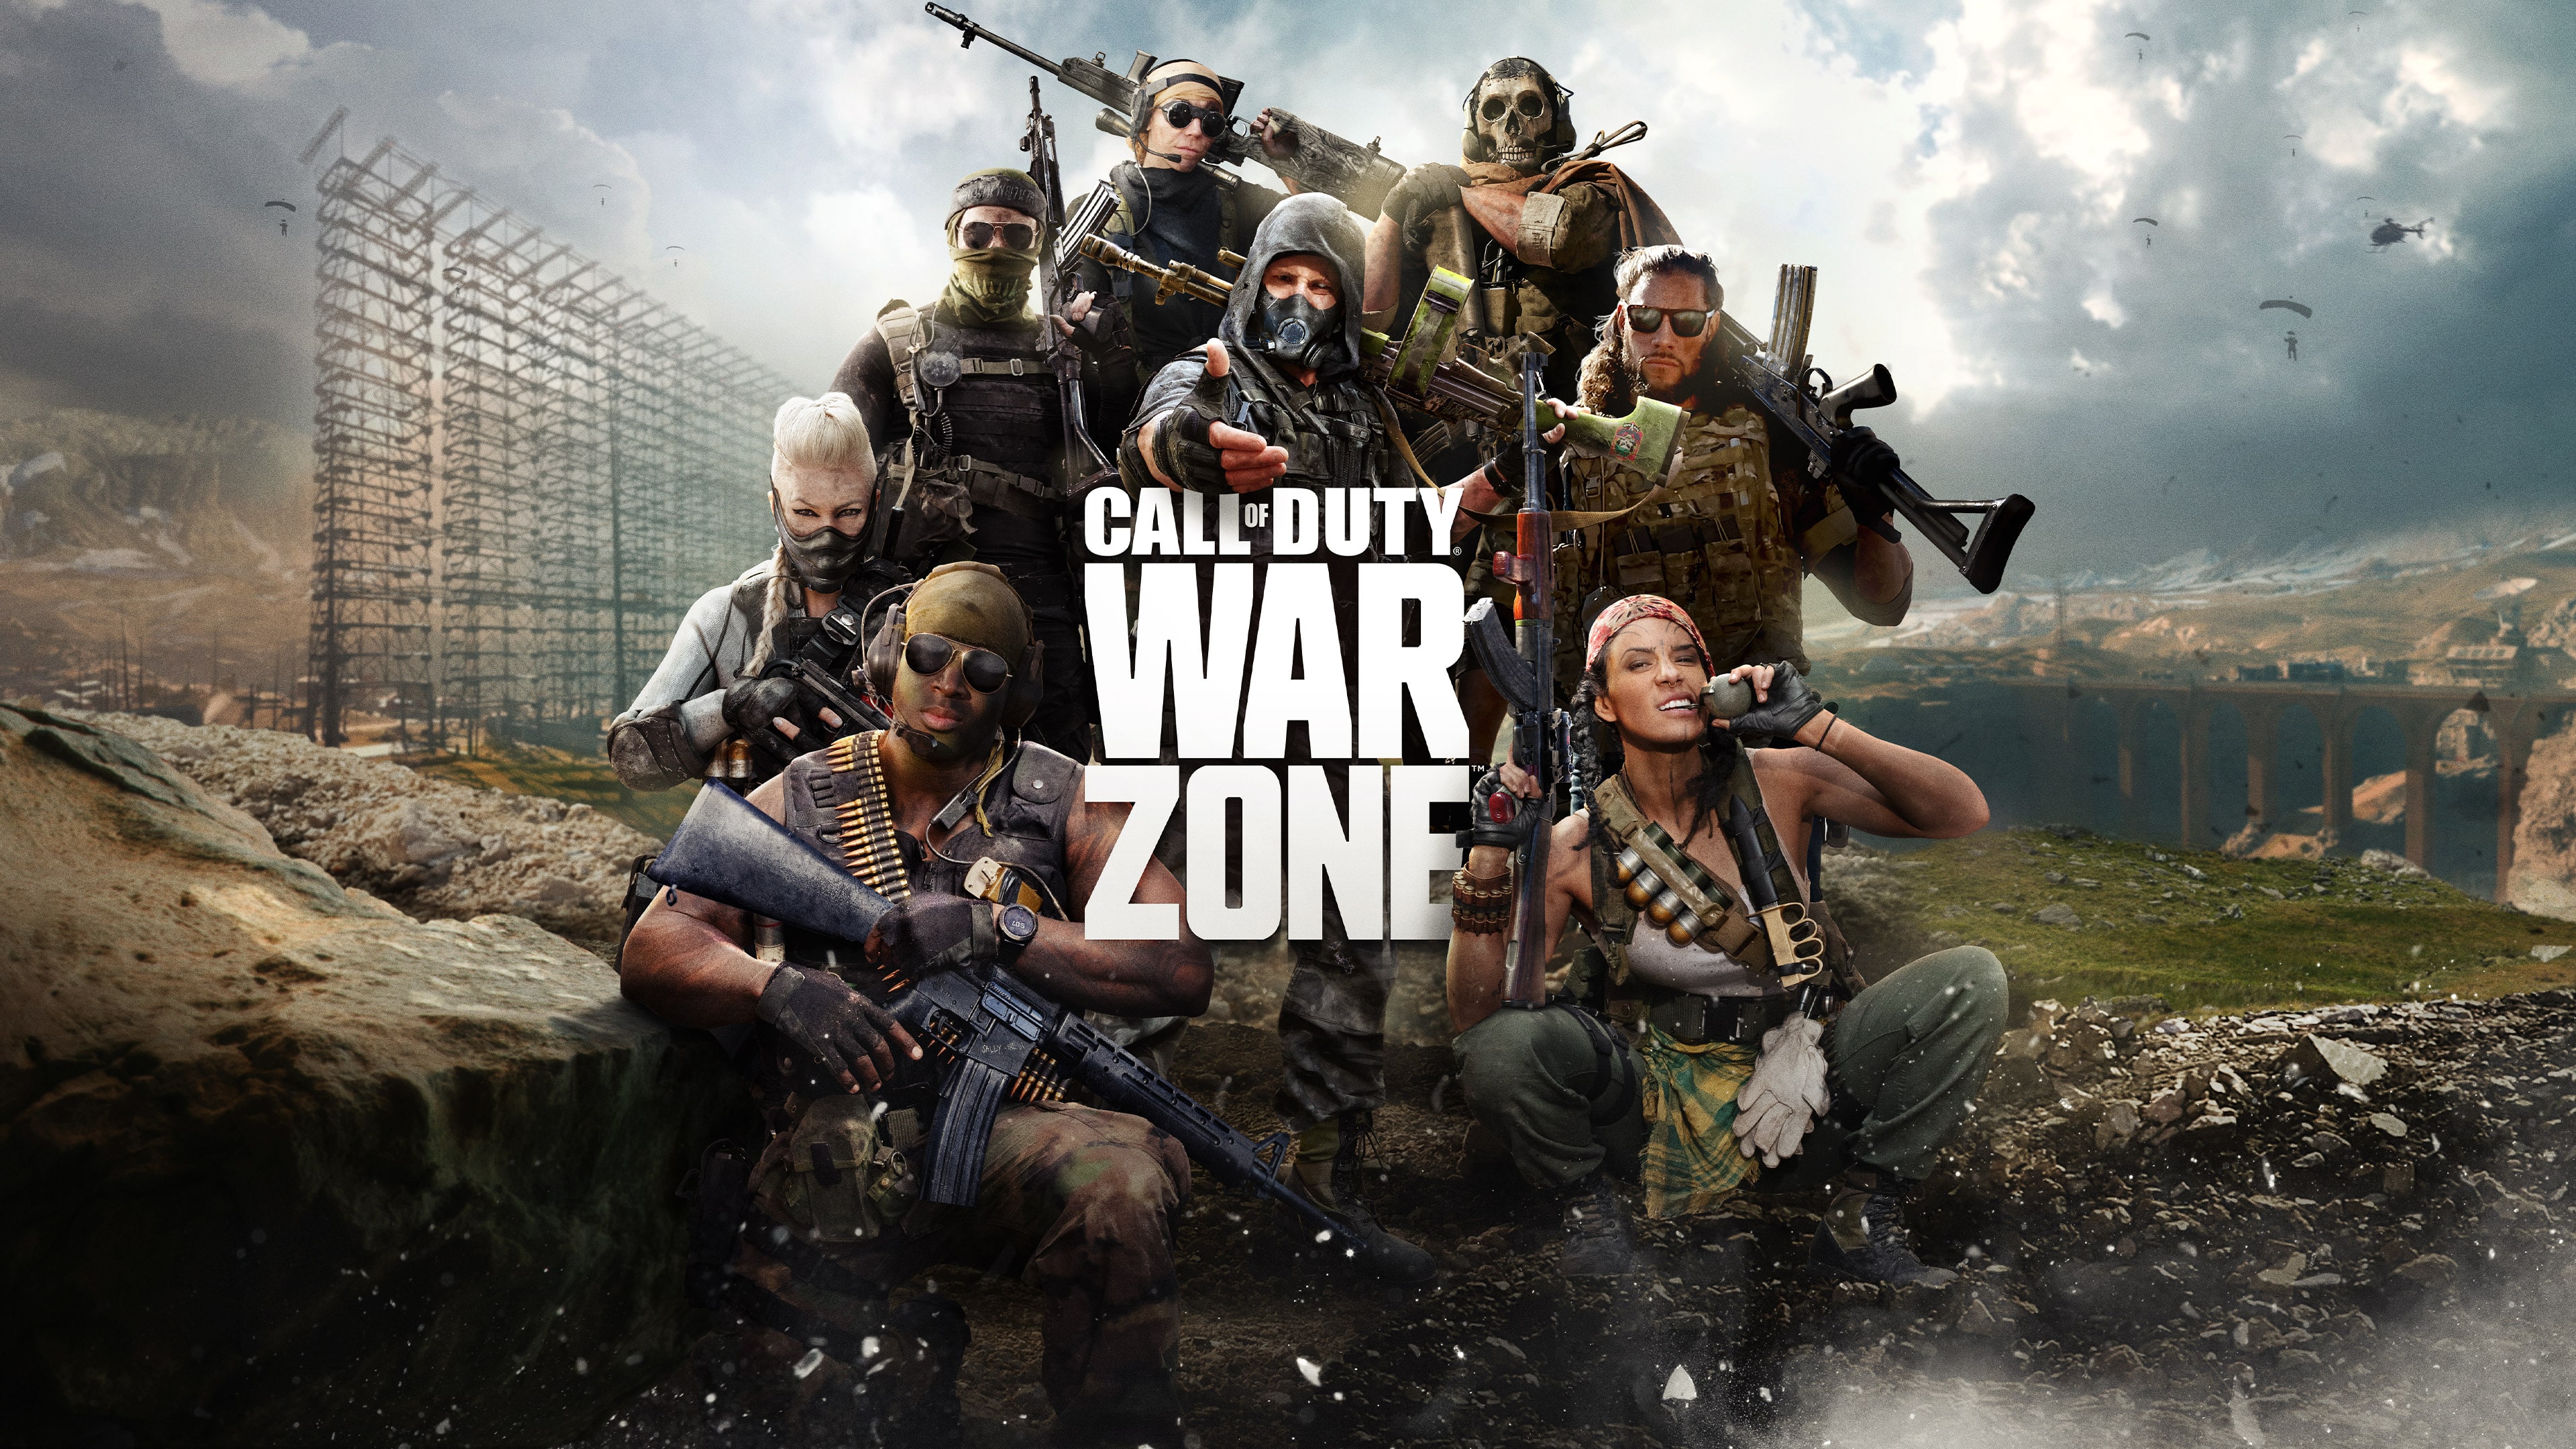 Call of duty warzone mobile play market. Рамка легенды Call of Duty. Last Call игра. Warzone last Stand.